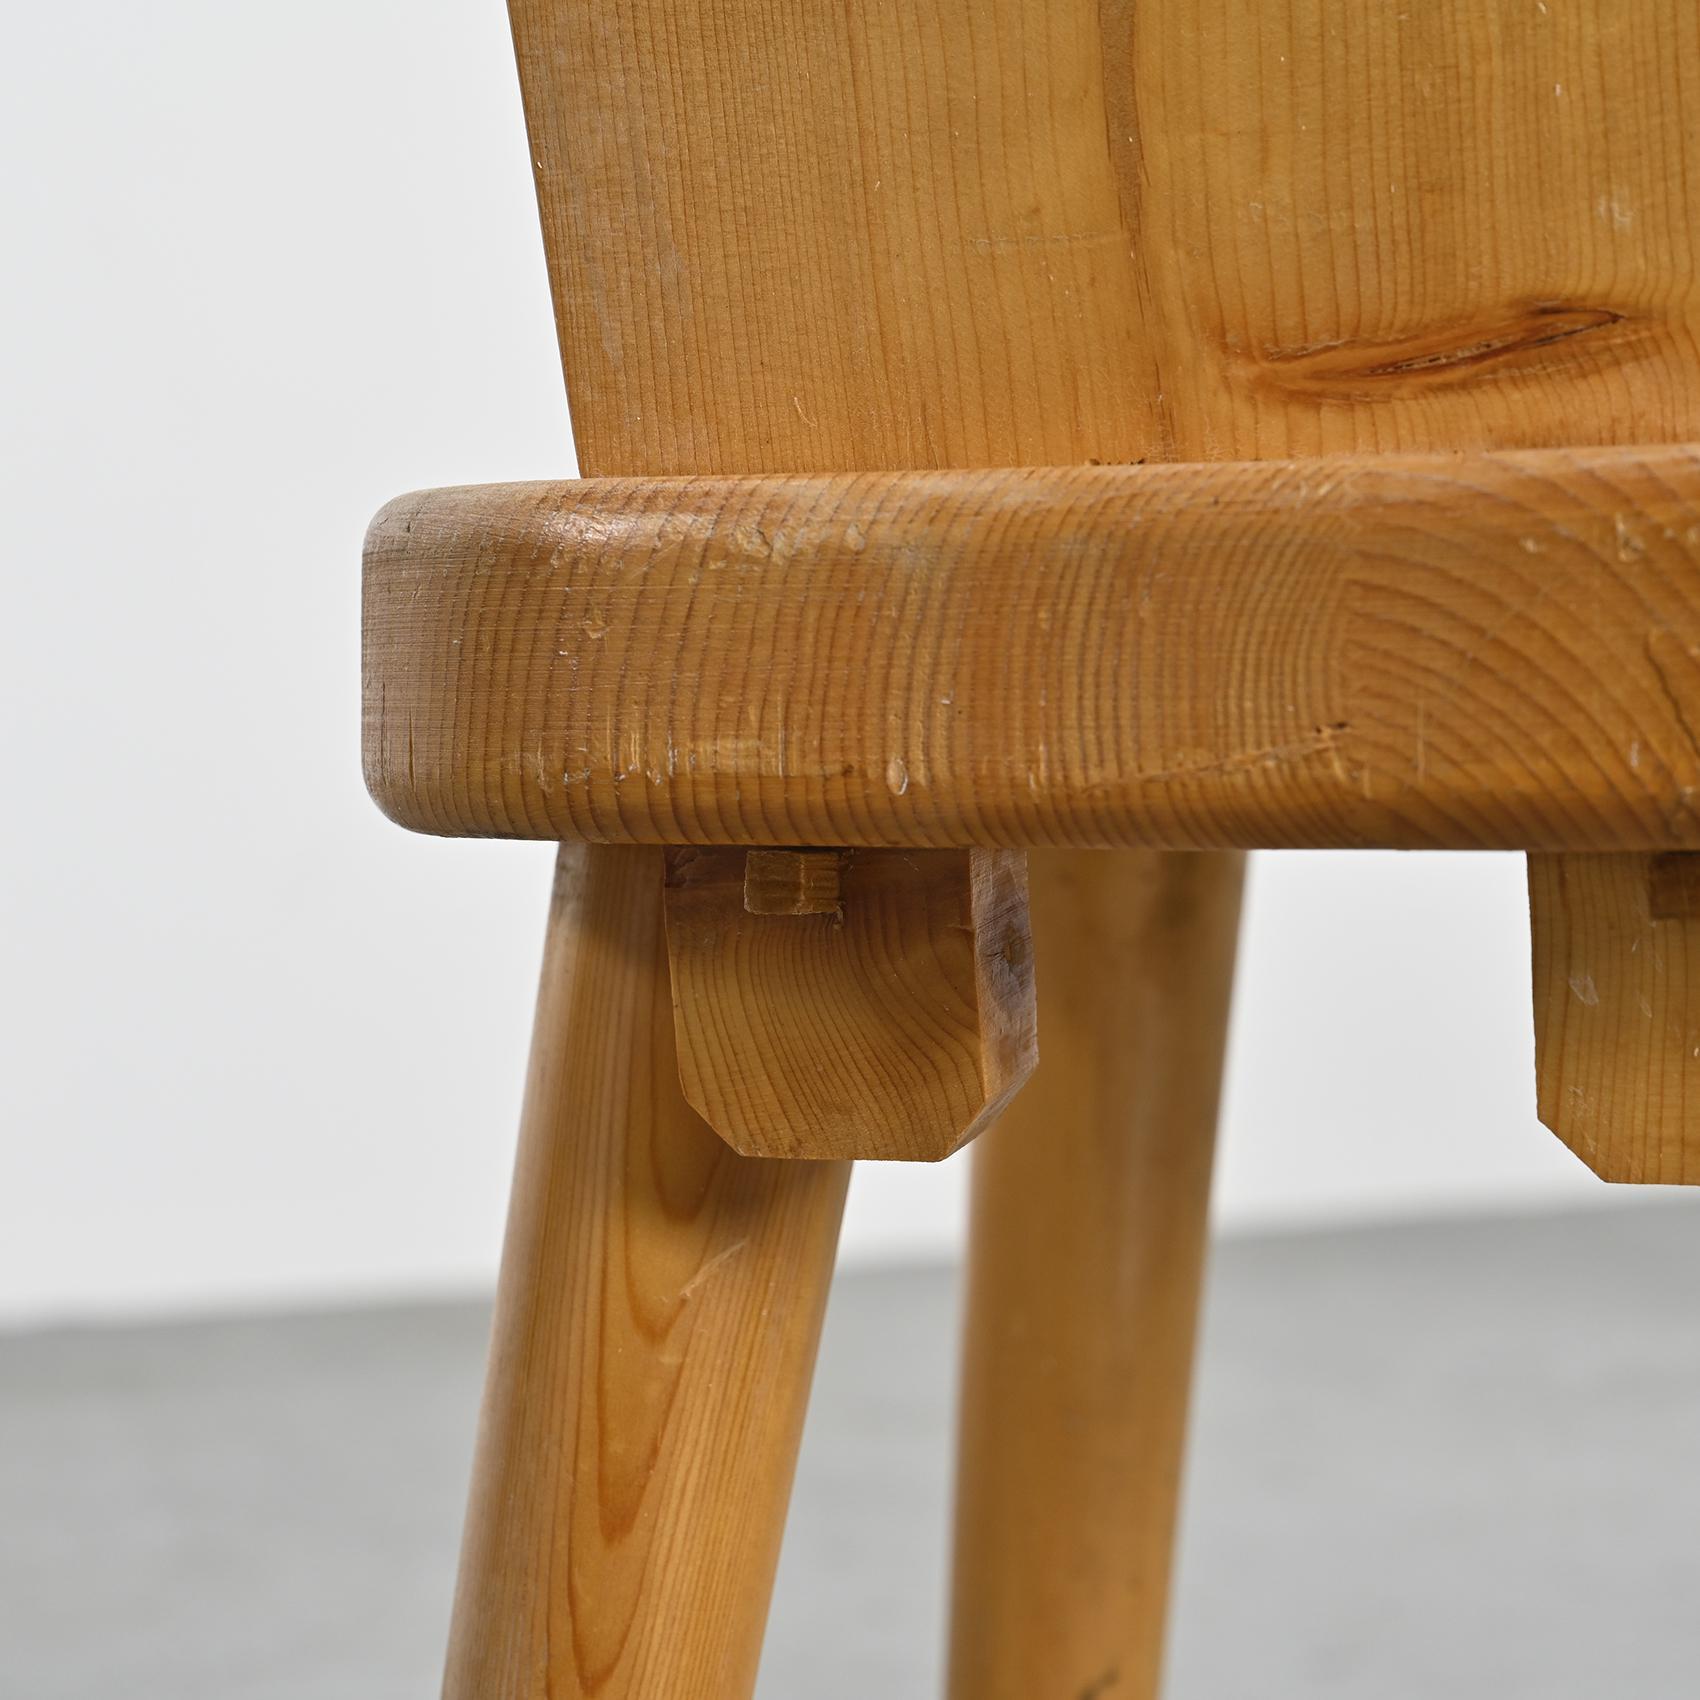 Solid Pine Chair by Christian Durupt, Meribel 1960 For Sale 5